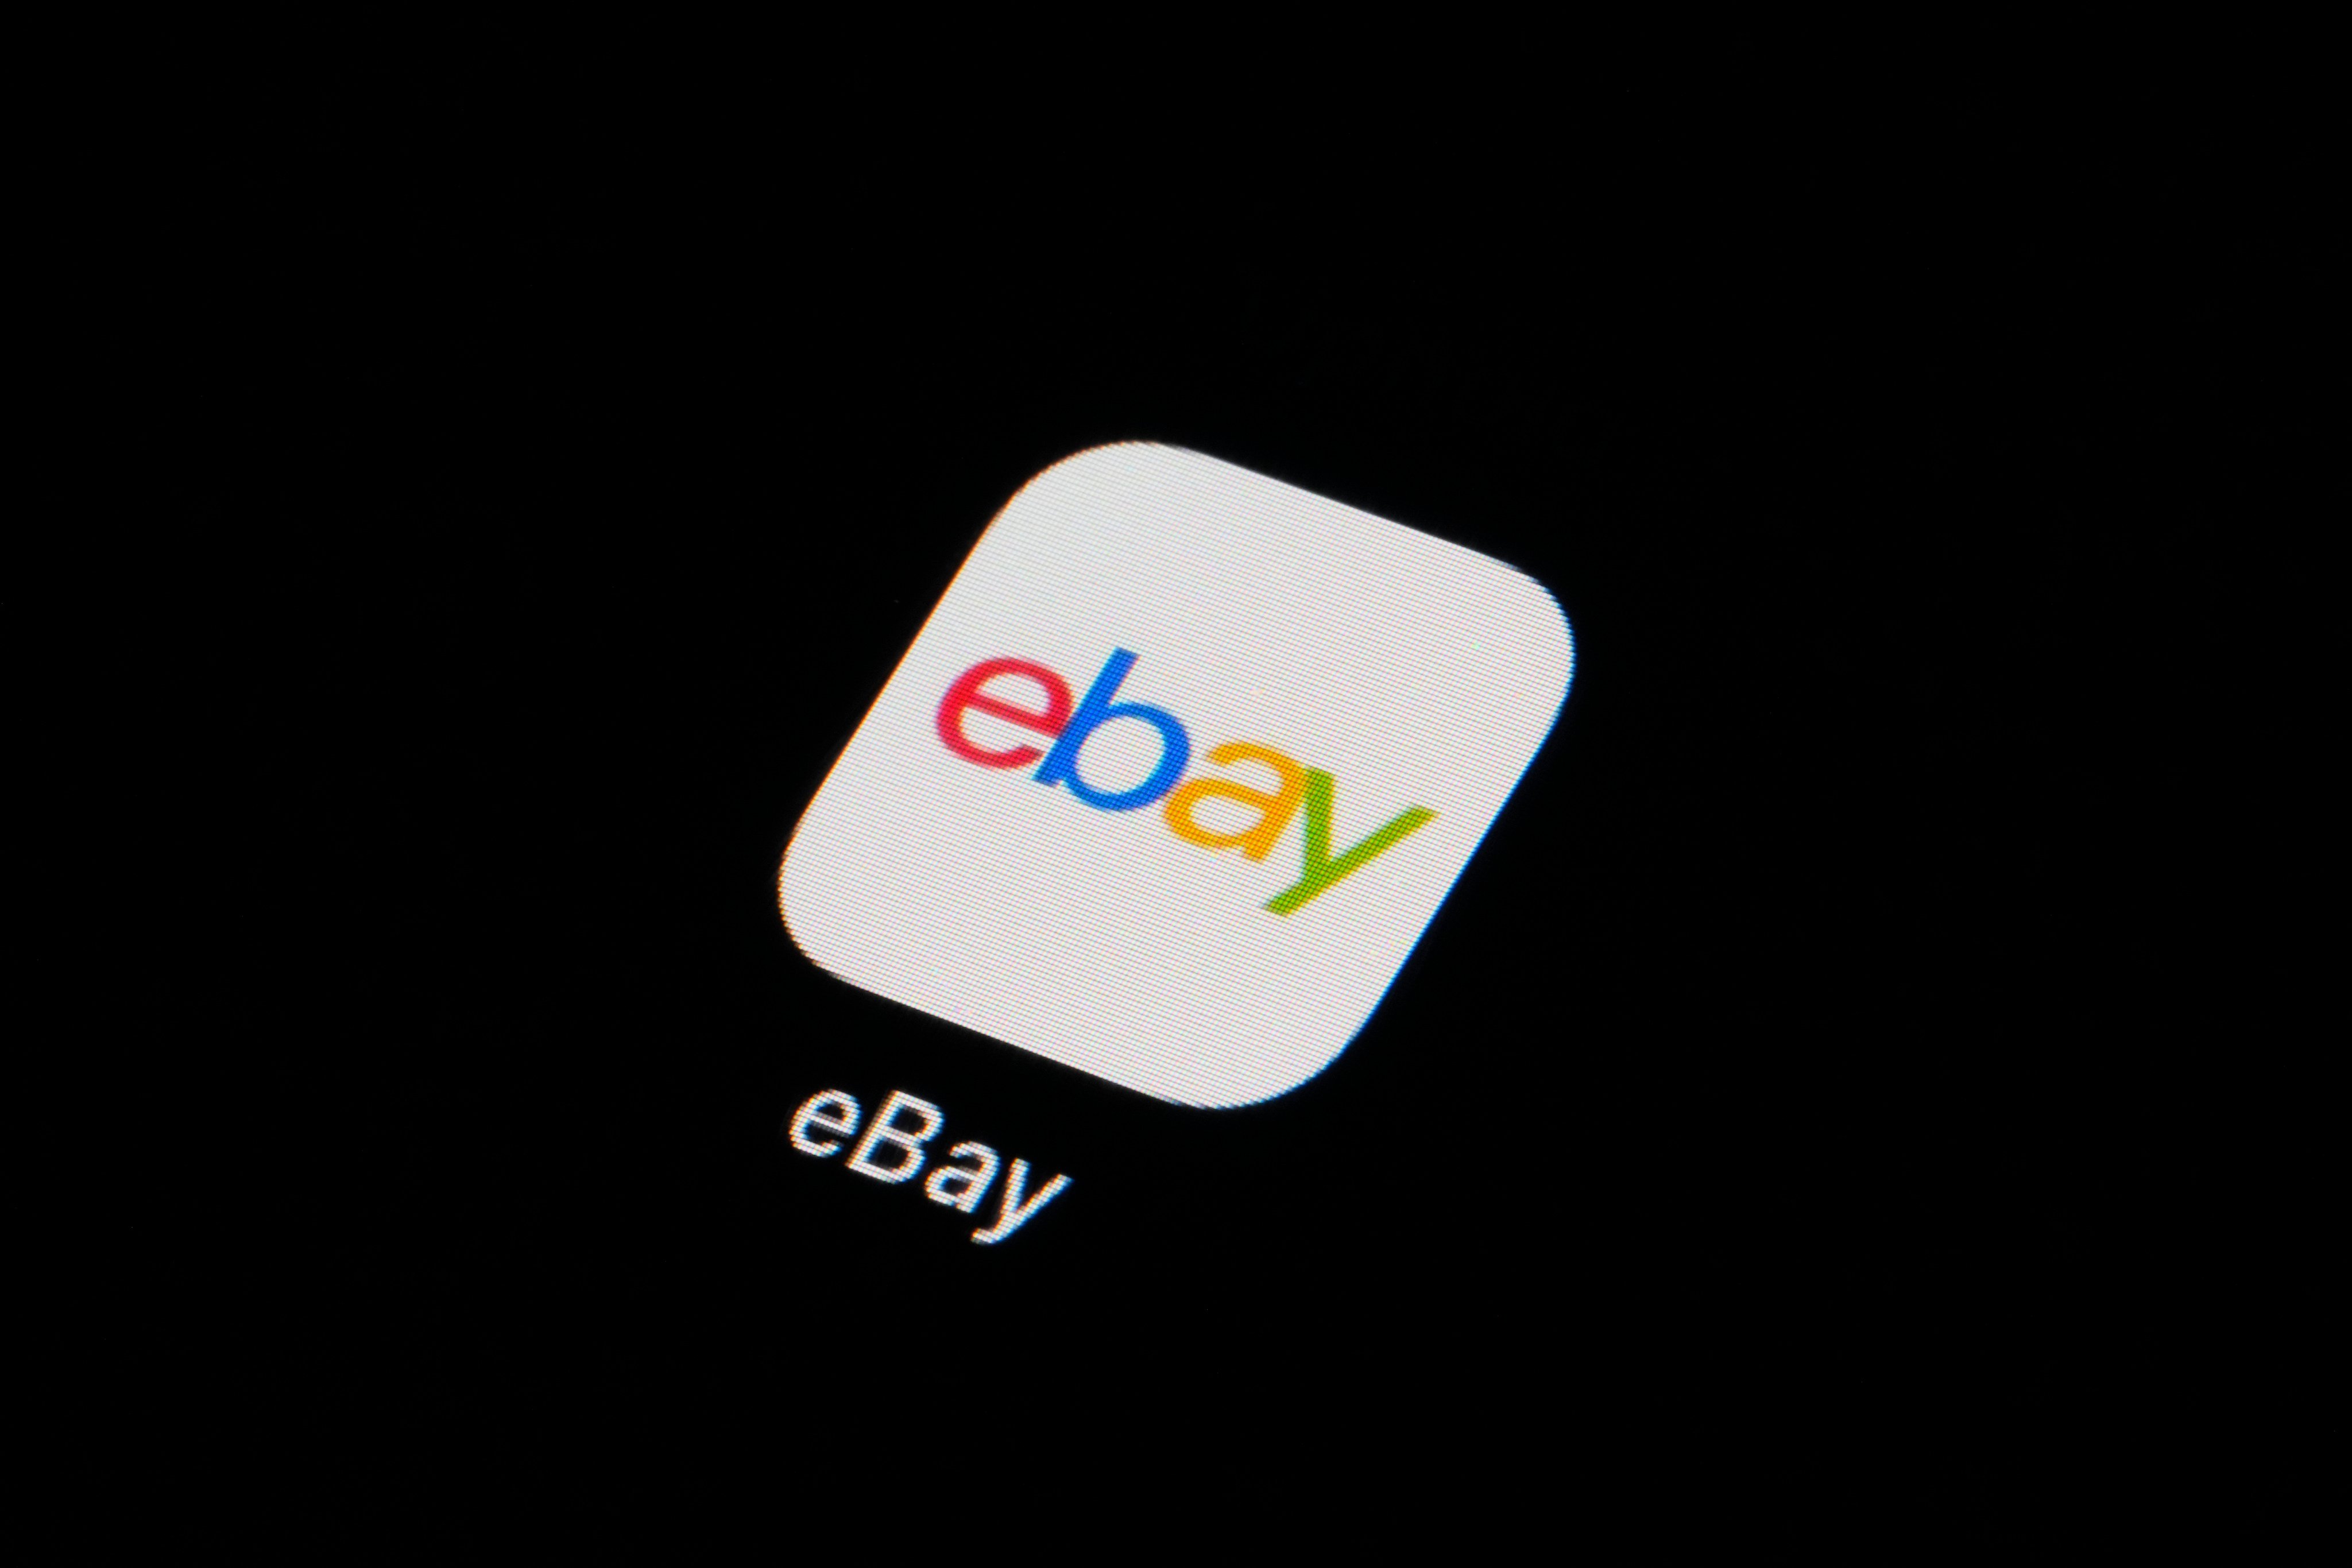 Ebay is cutting 9 per cent of its full-time employees in a fresh round of job reduction. Photo: AP